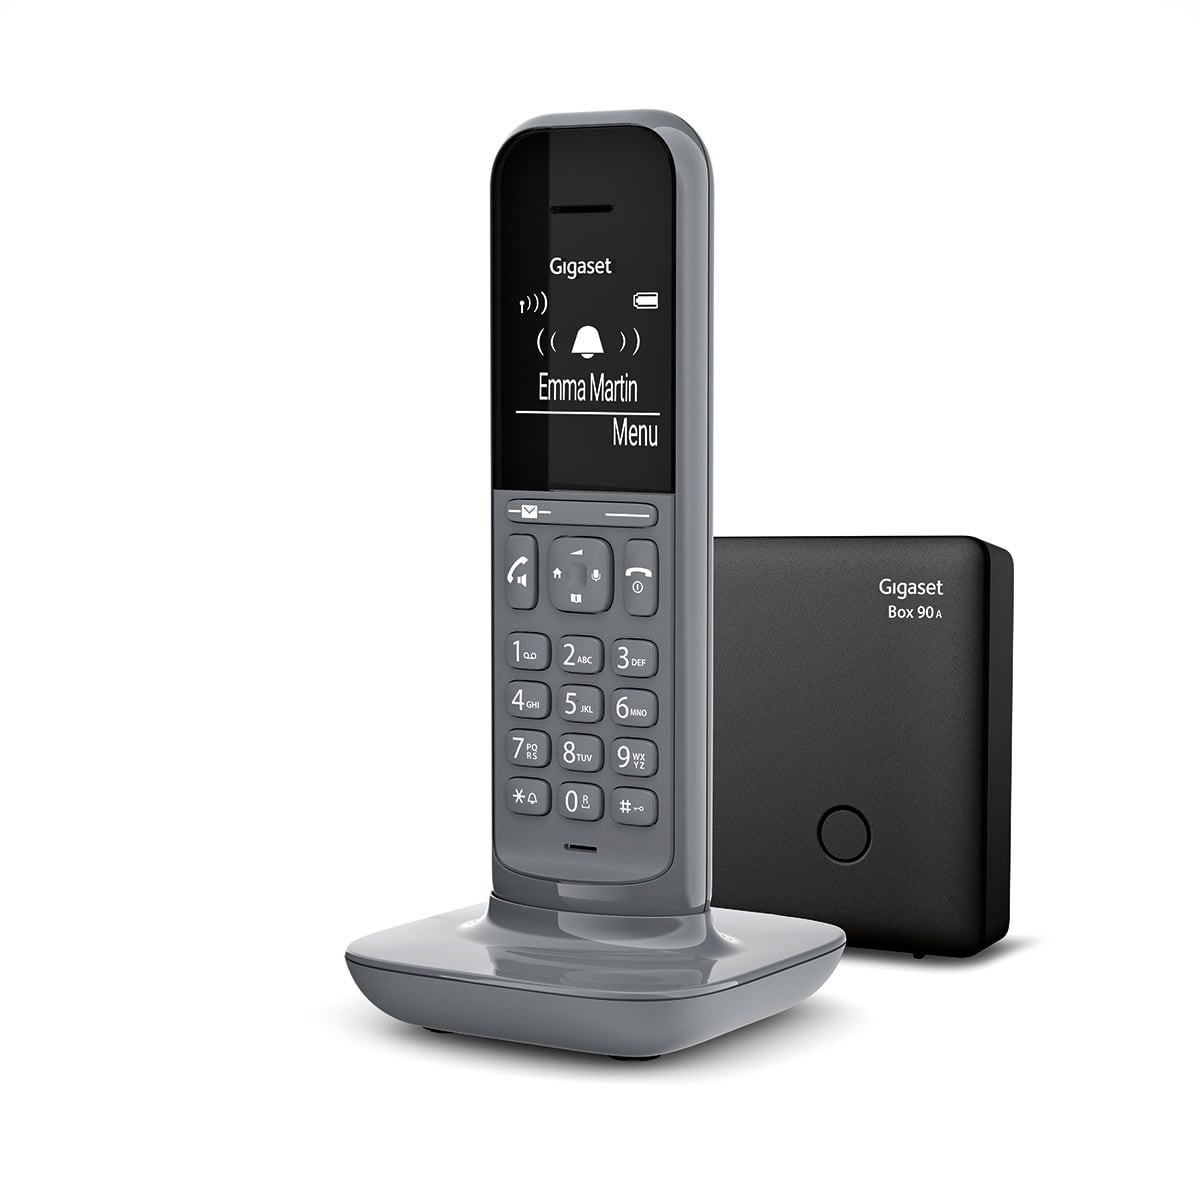 S30852-H2922-B103 UNIFY GIGASET OPENSTAGE CL390A - Analog/DECT telephone - Wireless handset - Speakerphone - 150 entries - Grey